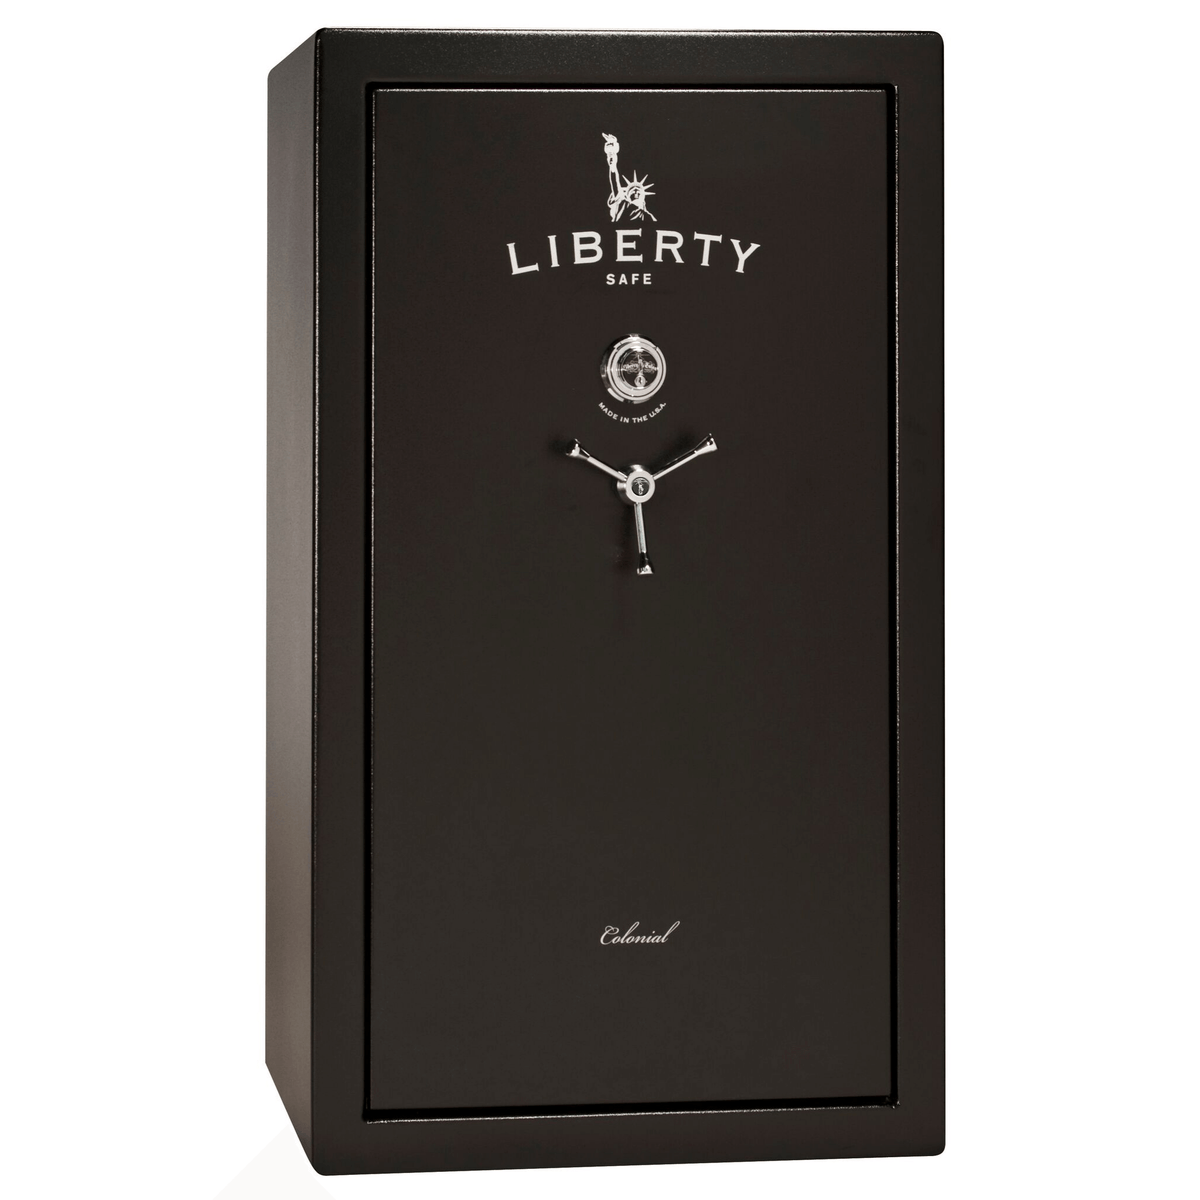 Liberty Colonial 30 Safe in Black Gloss with Chrome Mechanical Lock.